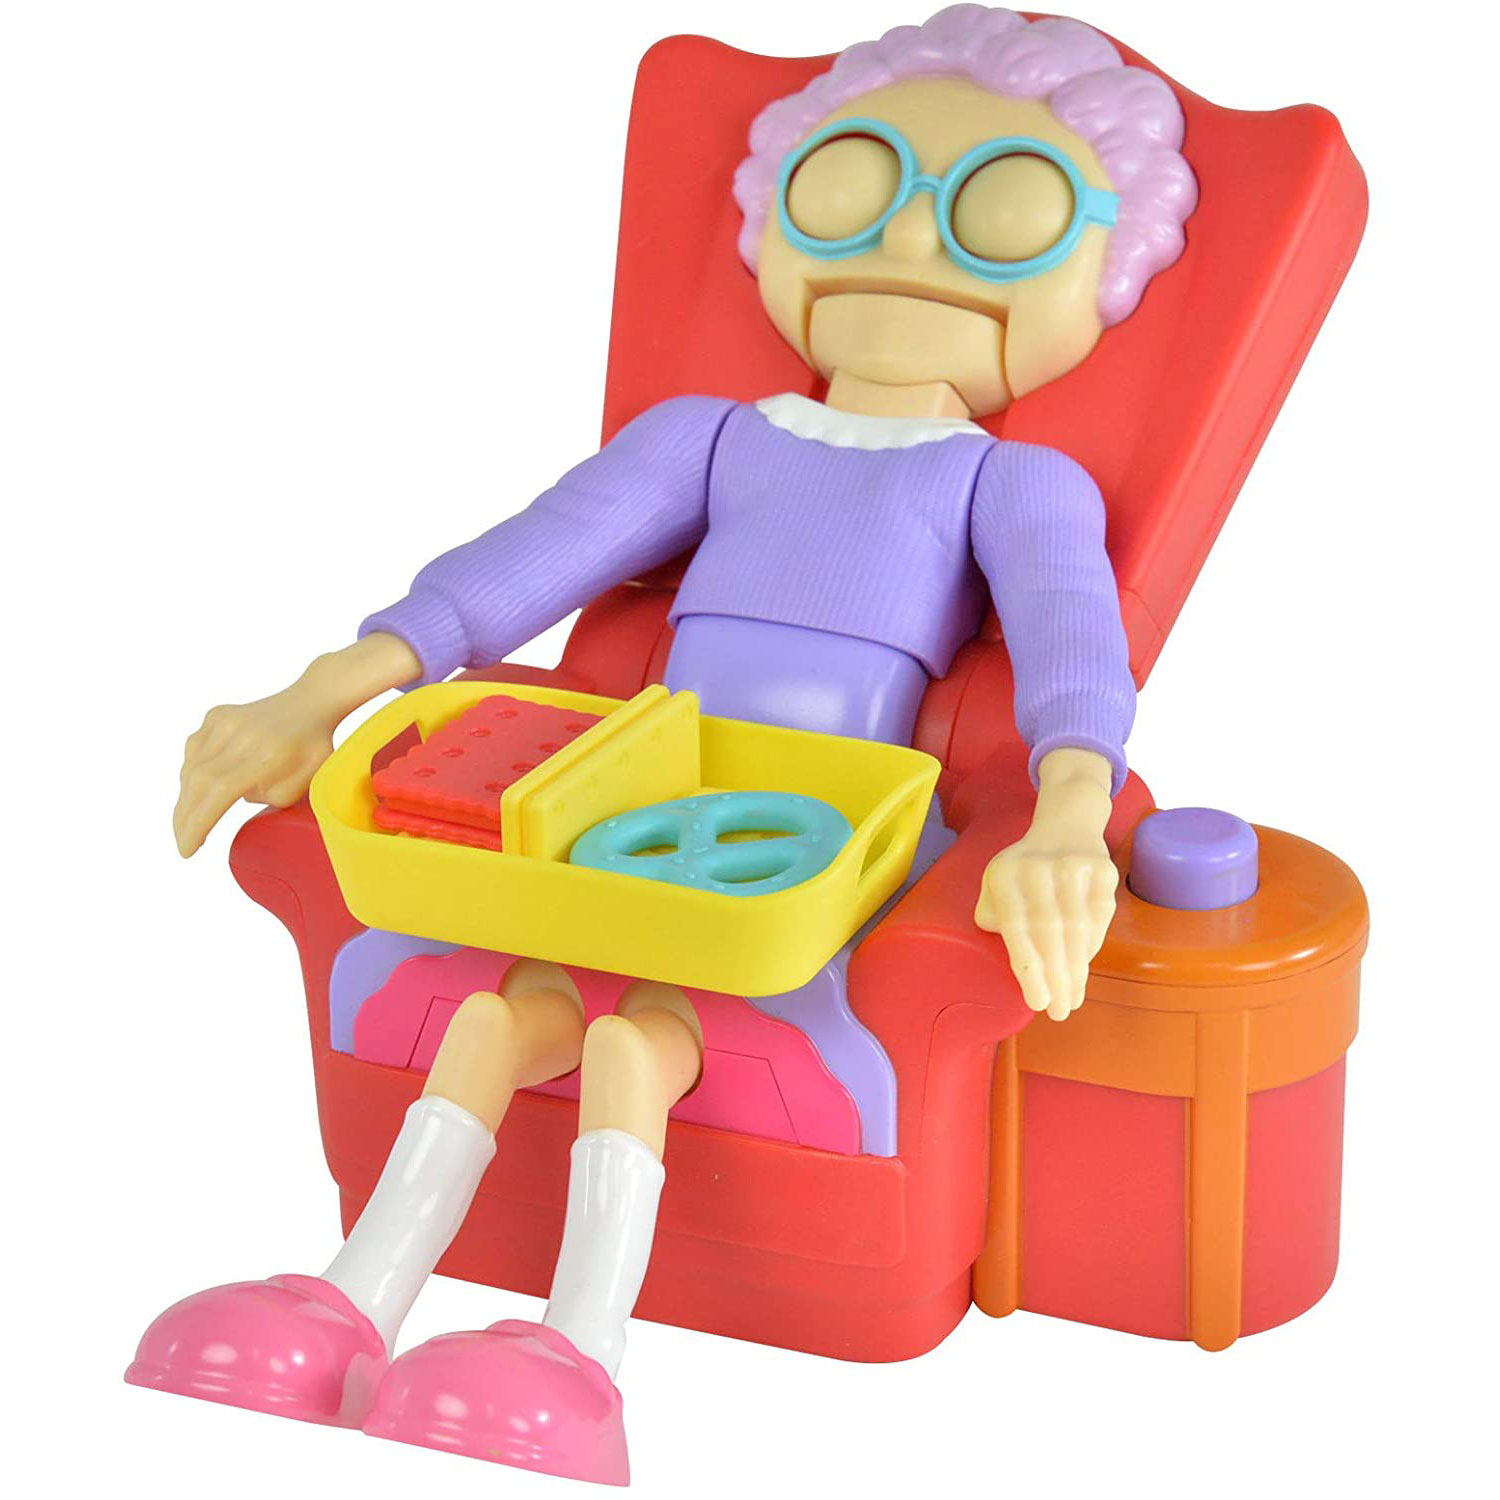 TOMY Greedy Granny Game Toy - T72465 for sale online